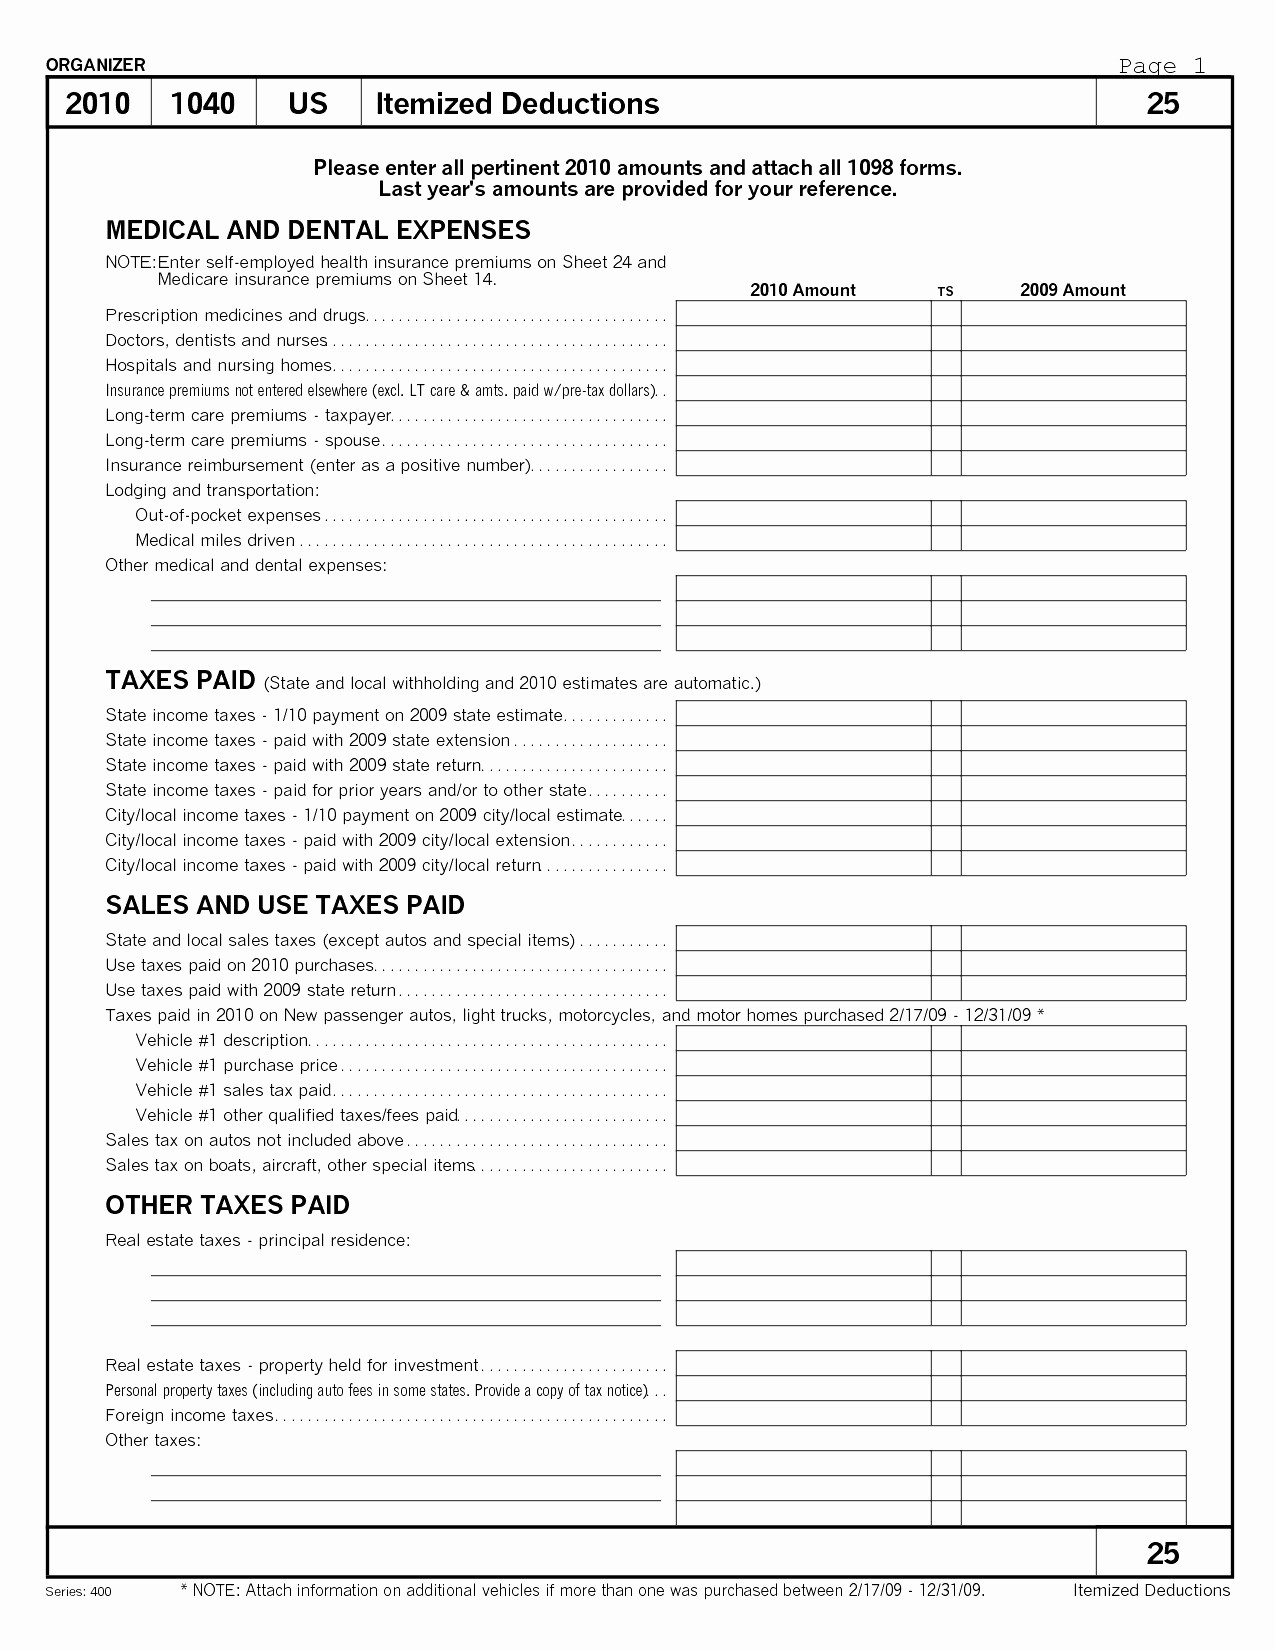 Business Itemized Deductions Worksheet Inspirational Document Small